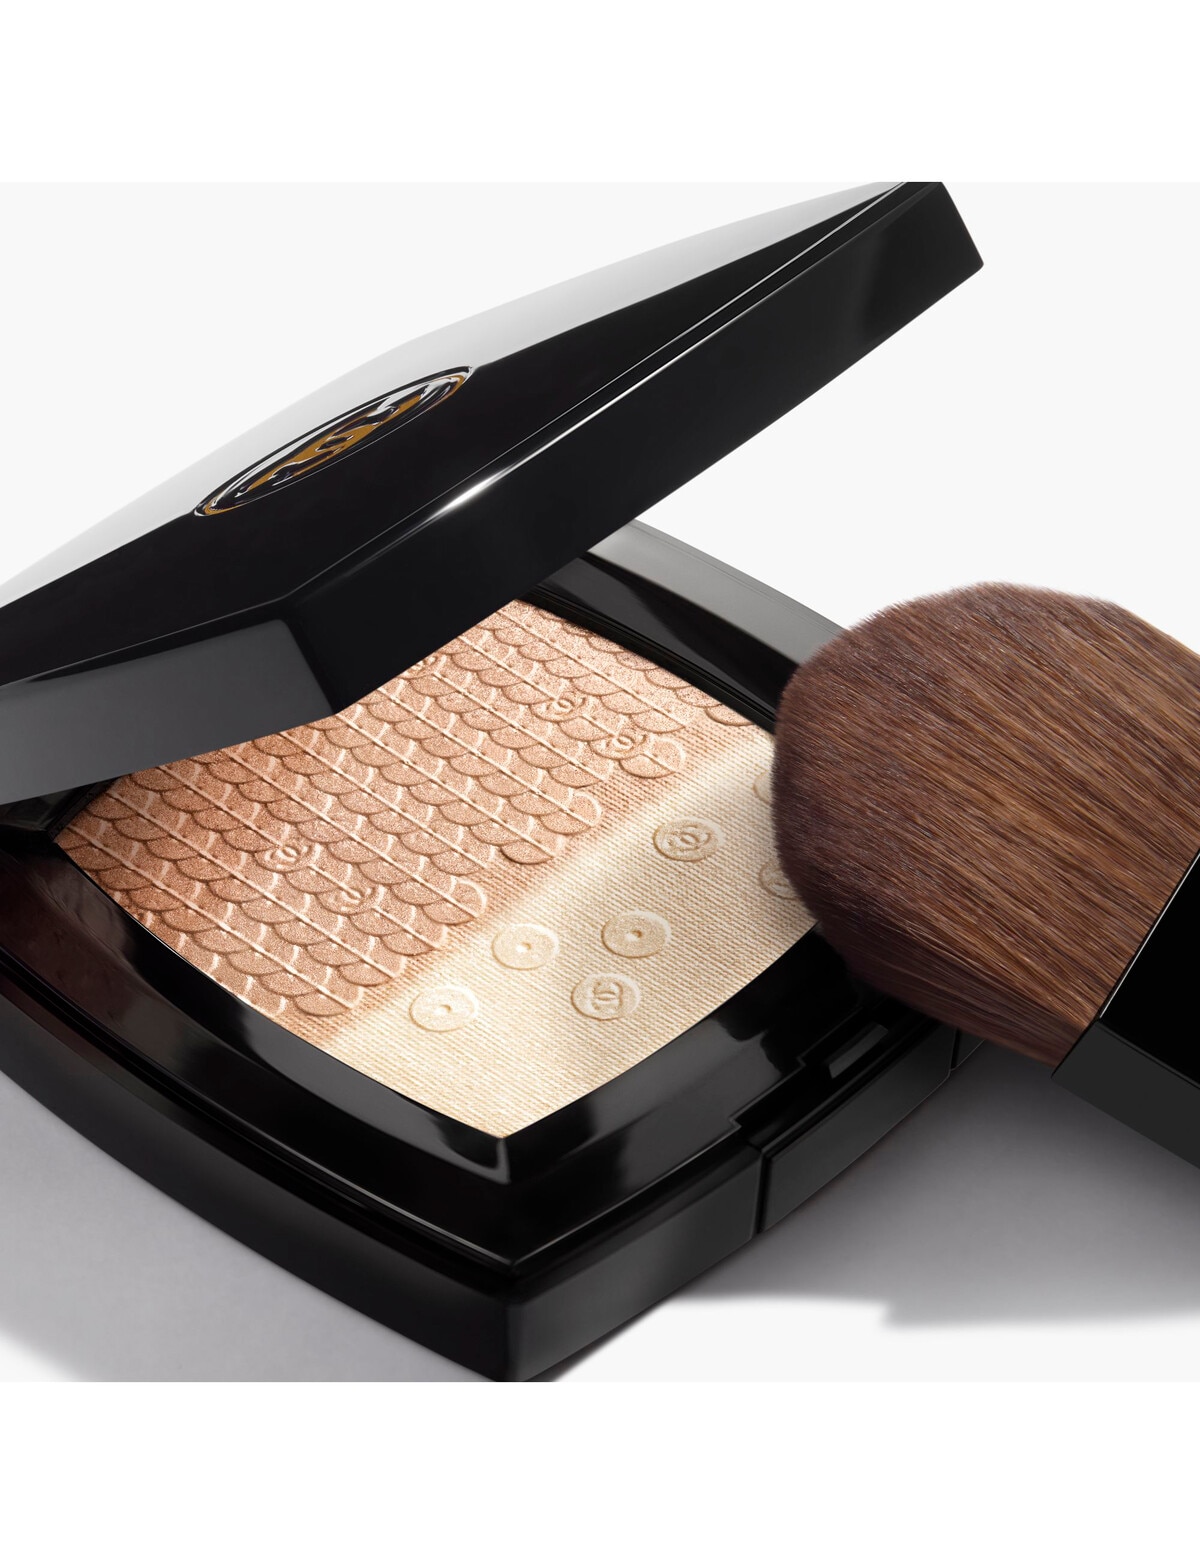 CHANEL DUO LUMIÈRE EXCLUSIVE CREATION ILLUMINATING POWDER DUO - HIGHLIGHTER